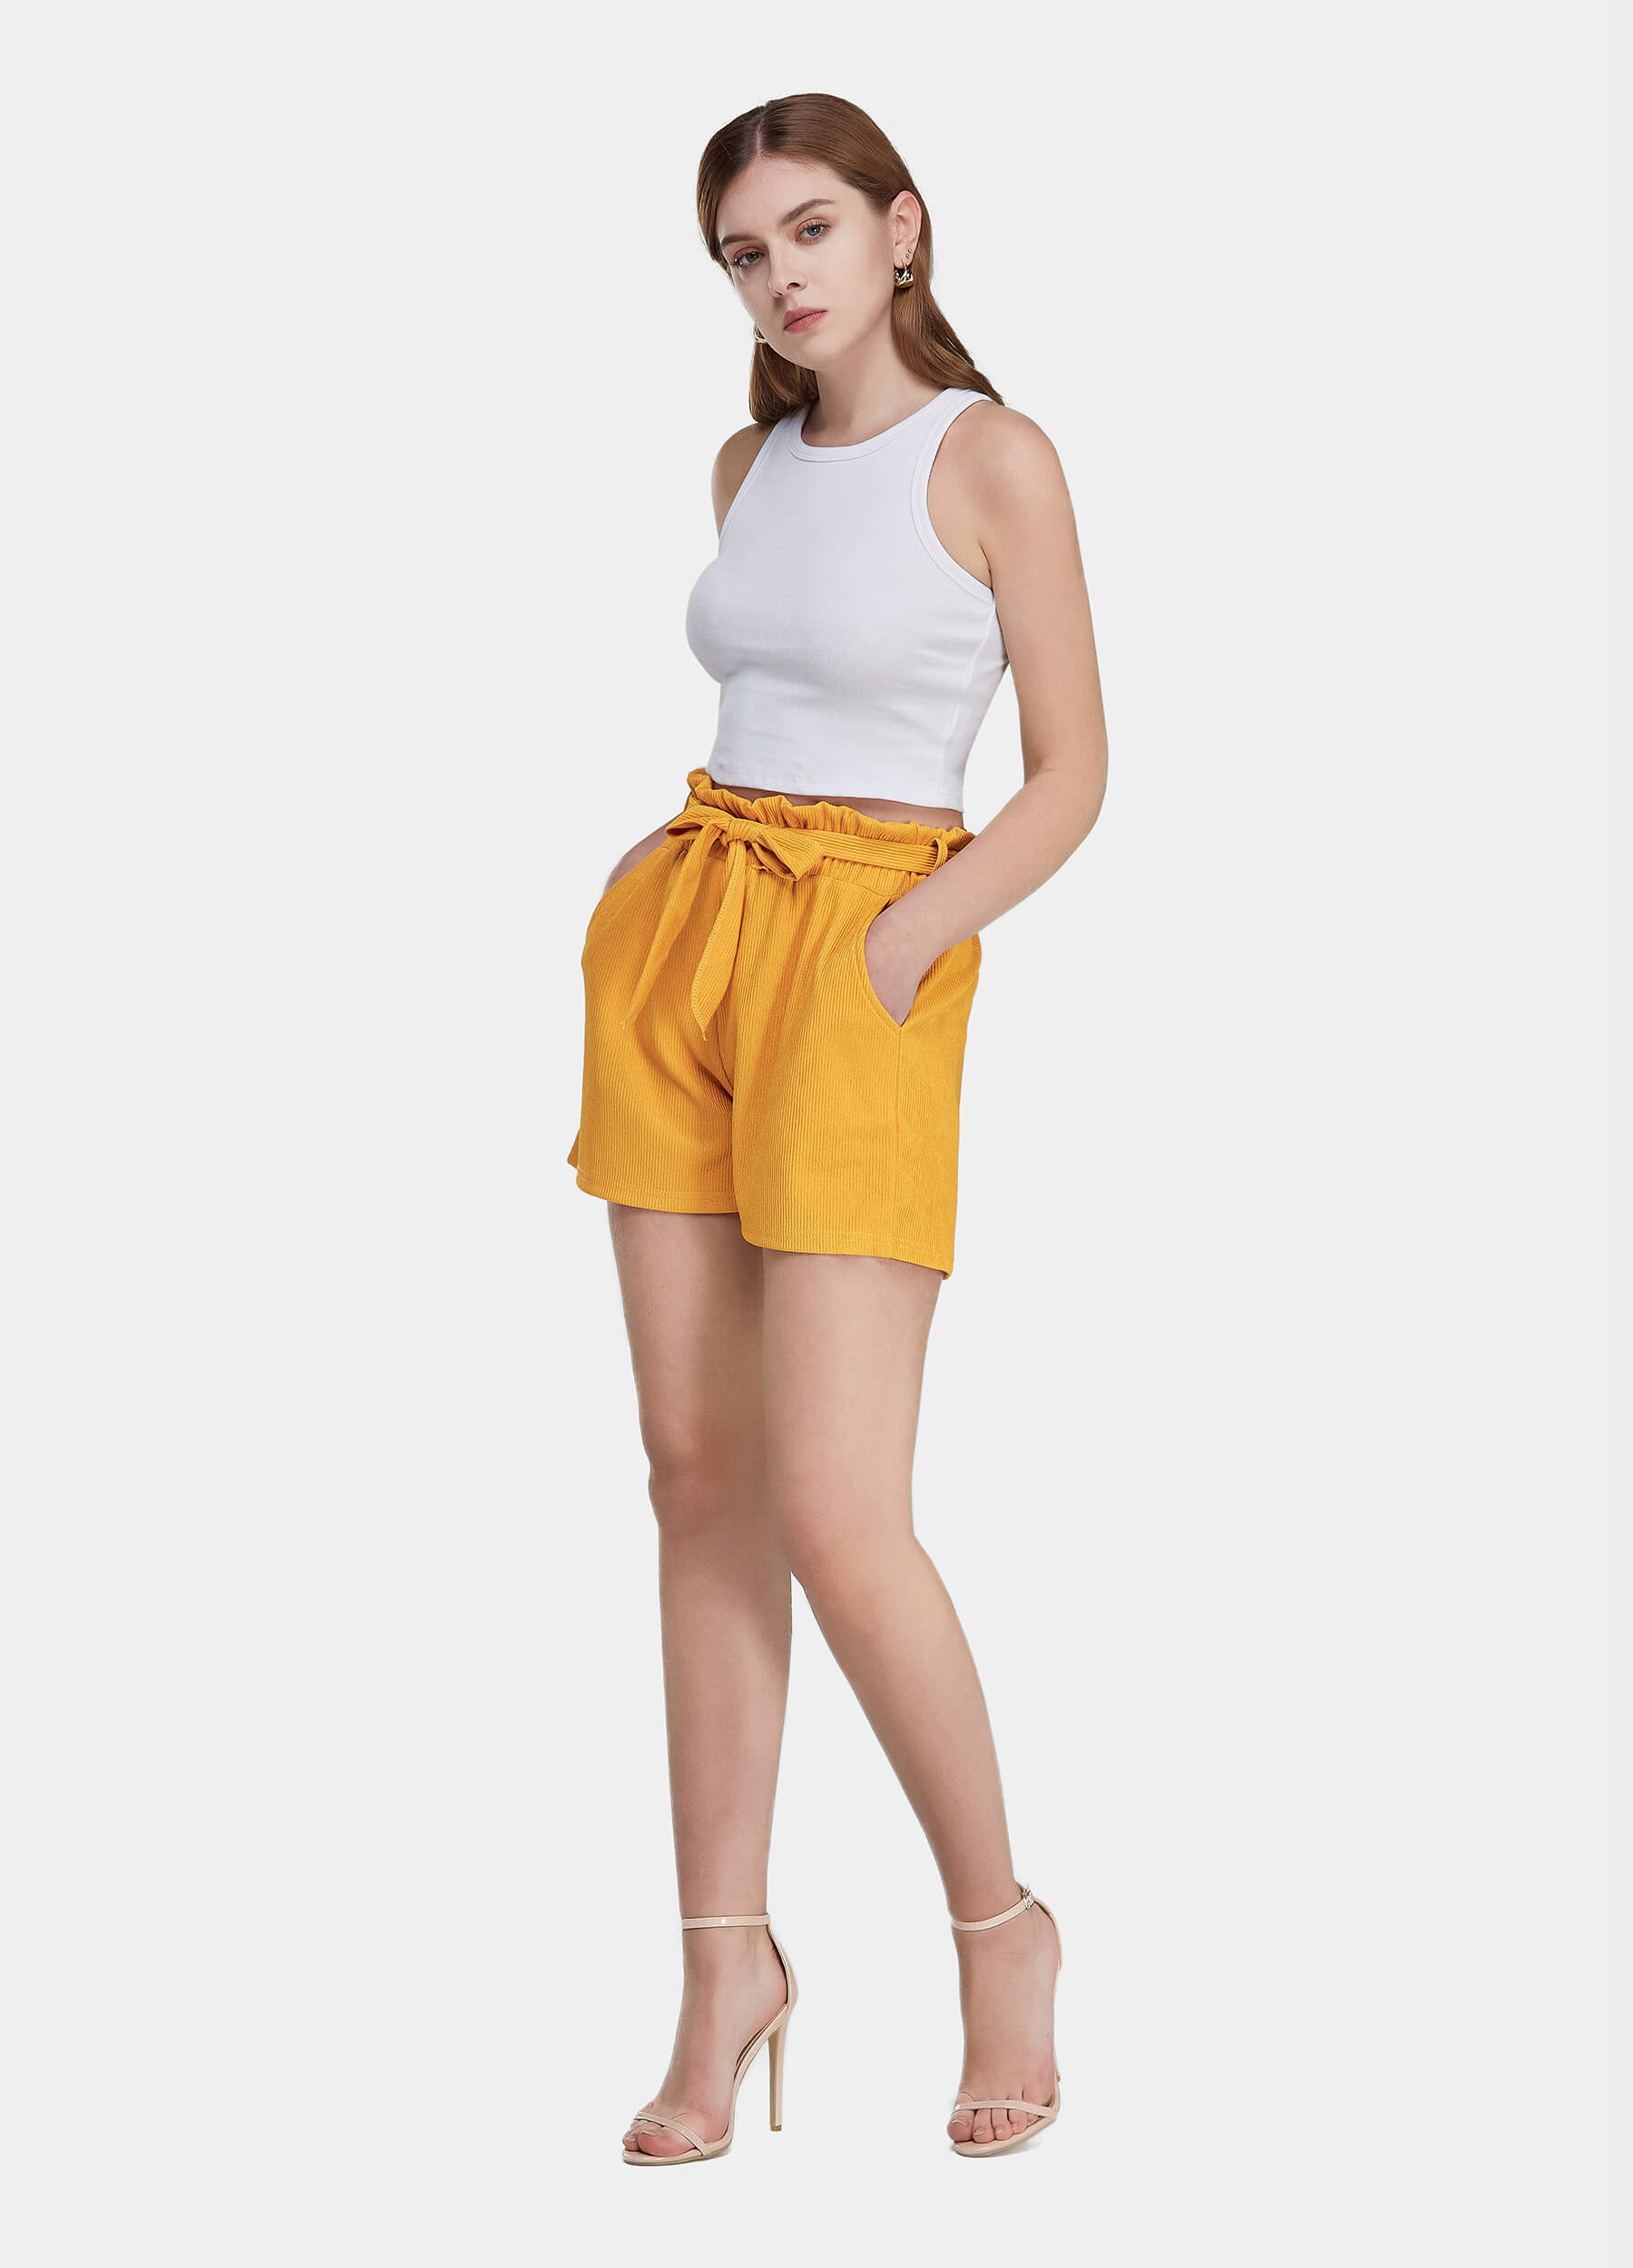 Women's High Waist Dual Pockets Tie Front Solid Shorts-Ginger side view